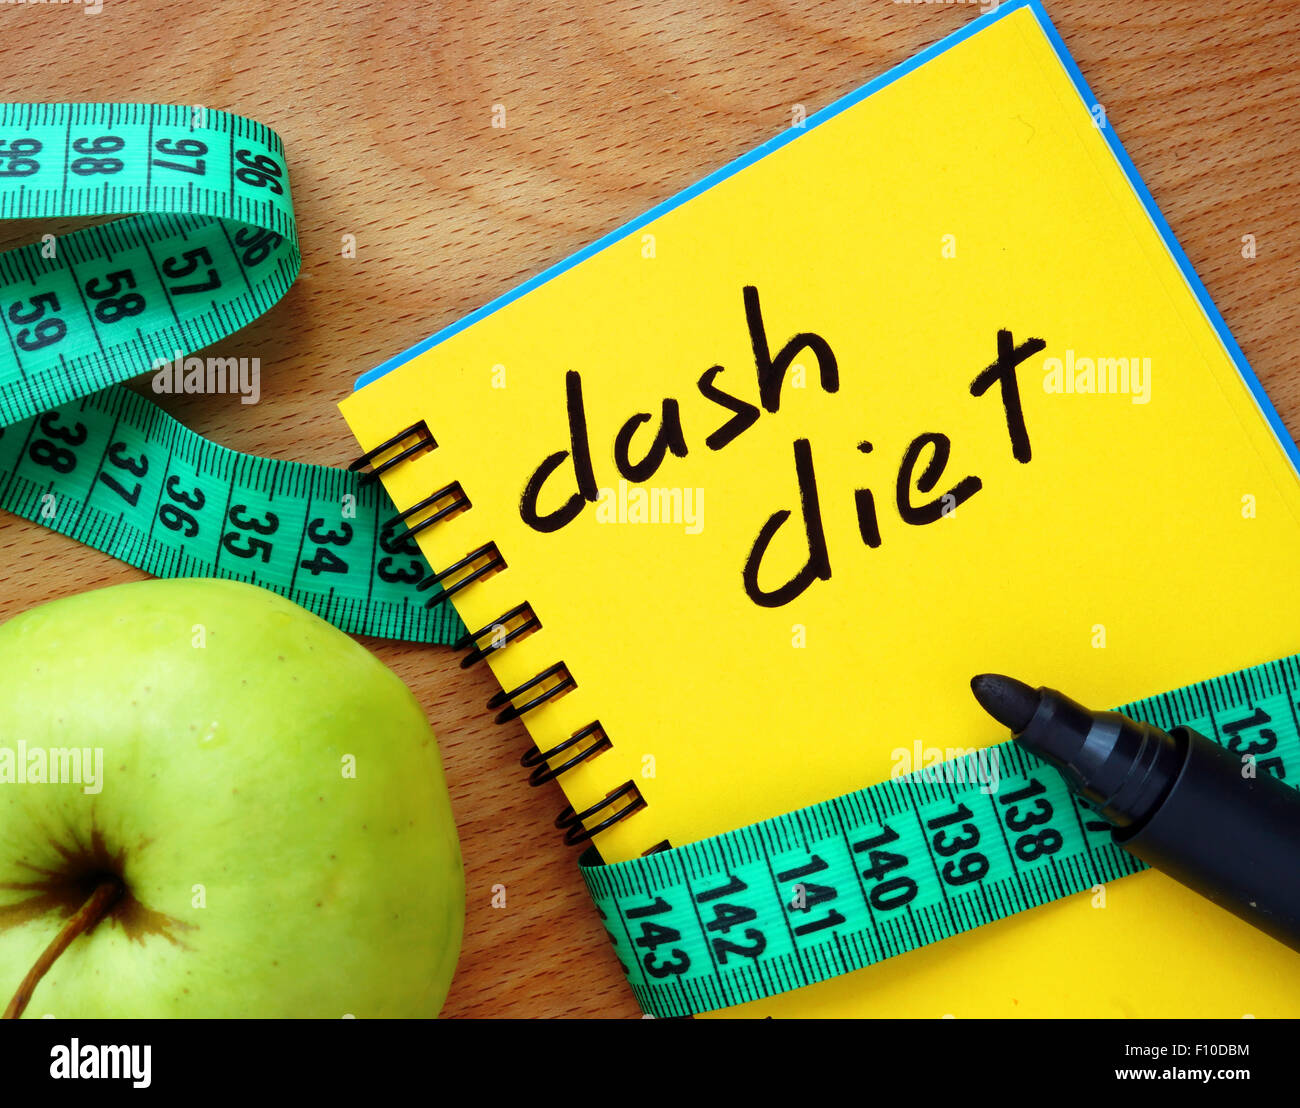 Notepad with dash diet, apple and measure tape Stock Photo